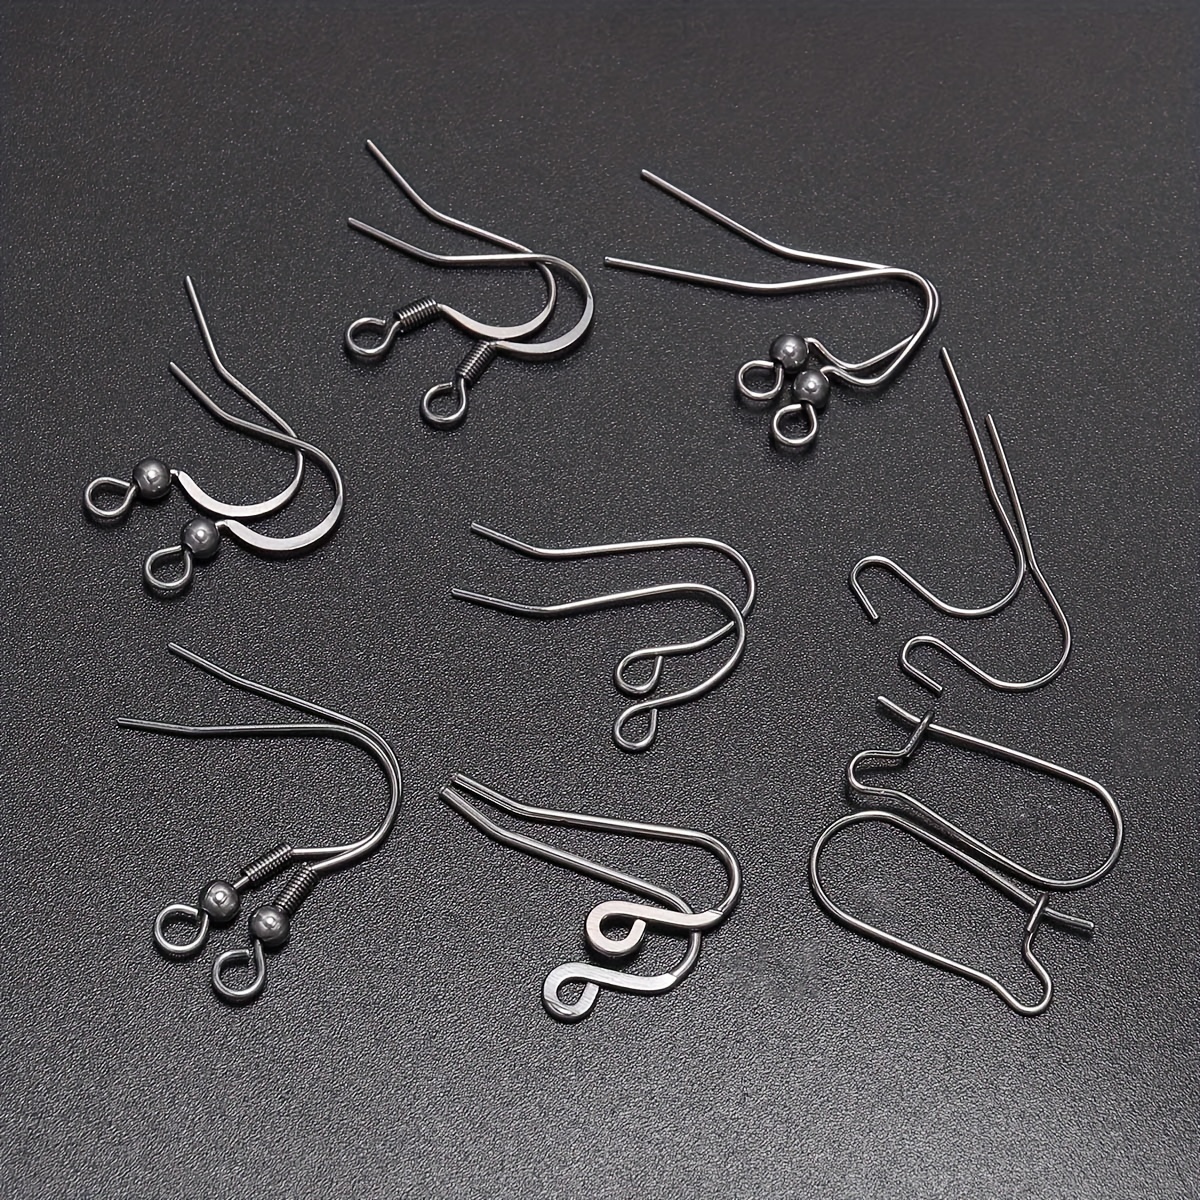 50pcs(25pairs) 0.8mm Pin Titanium Stainless Steel Ear Wire 2mm